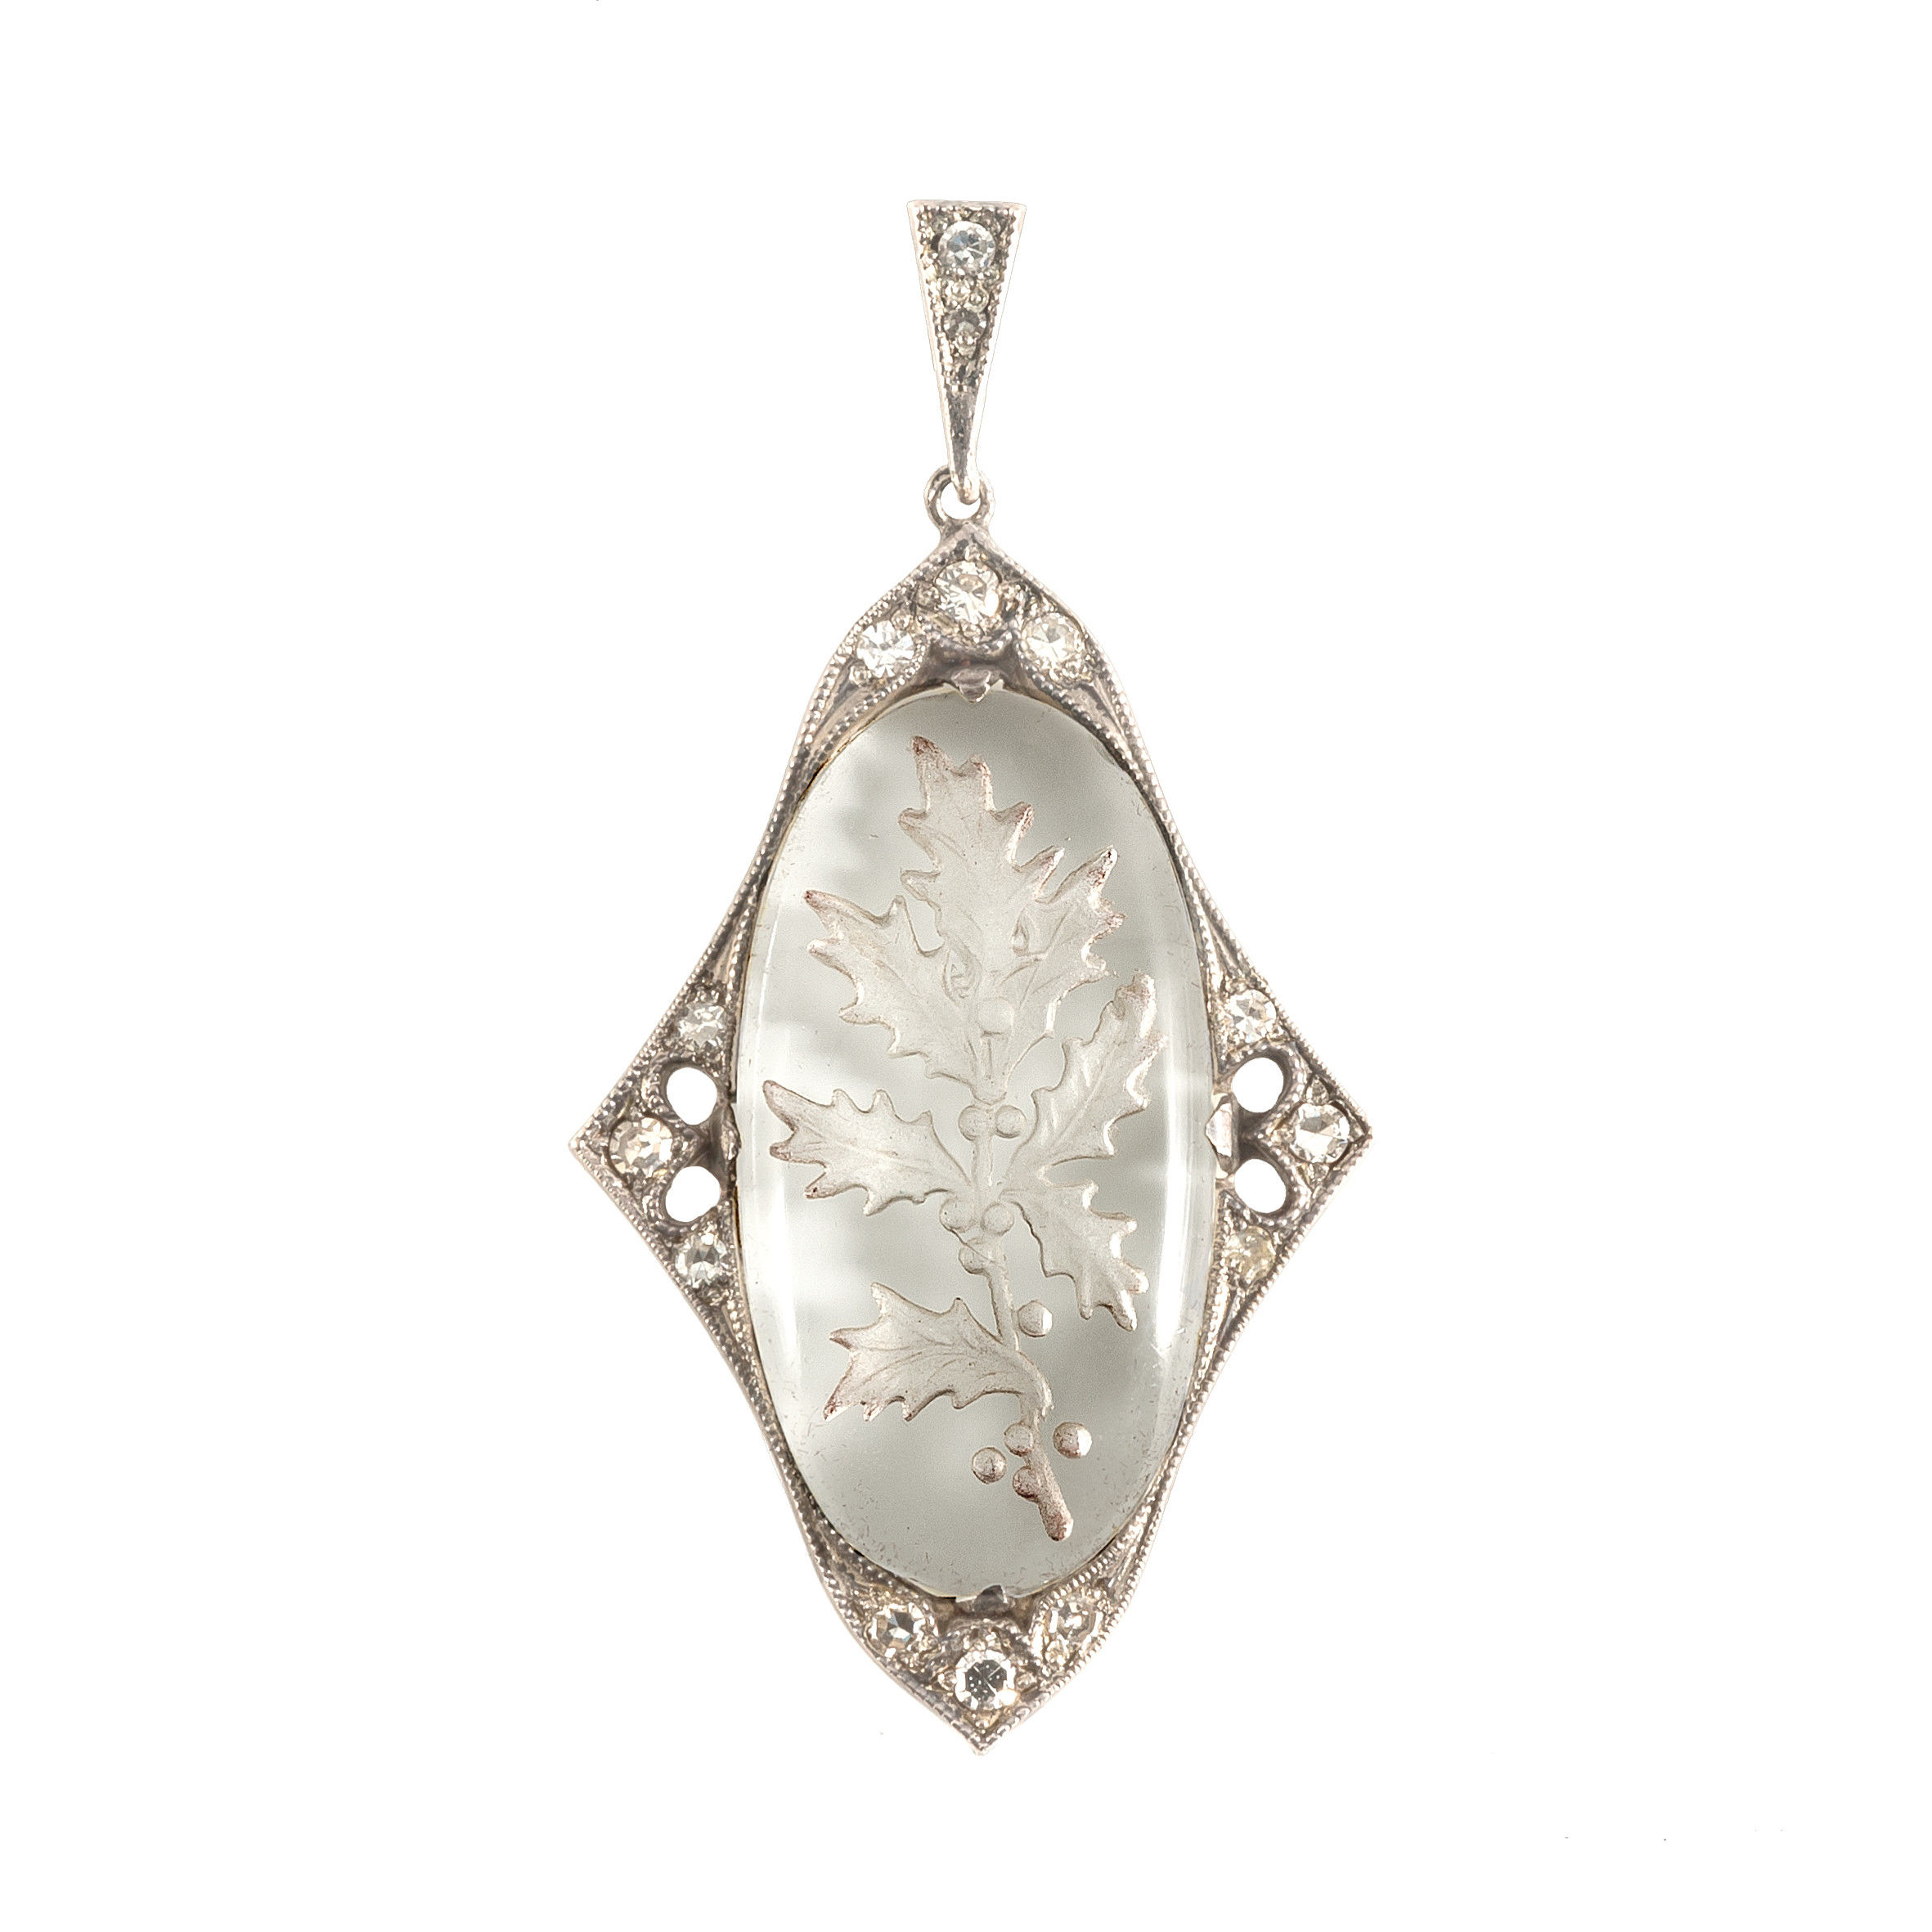 Silver Belle Époque pendant, hand-carved crystal set with old-cut diamonds